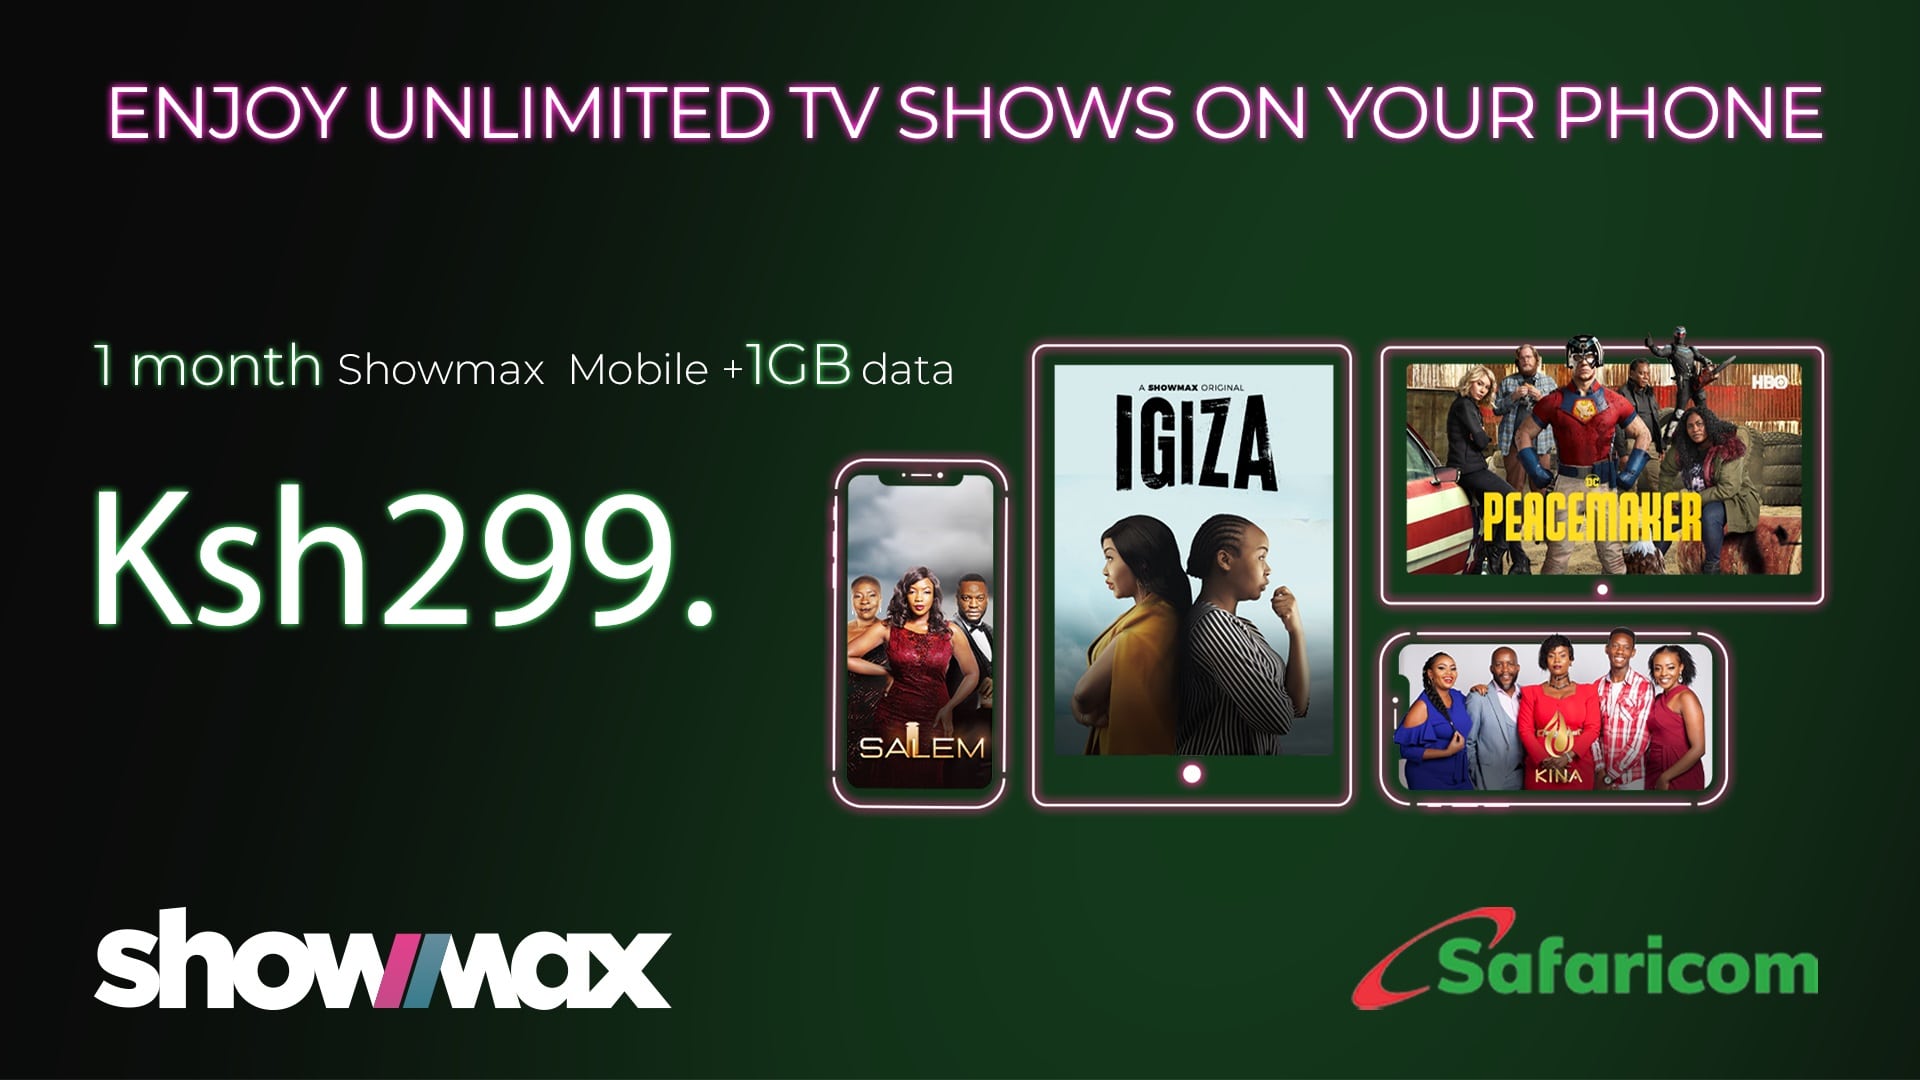 Showmax mobile